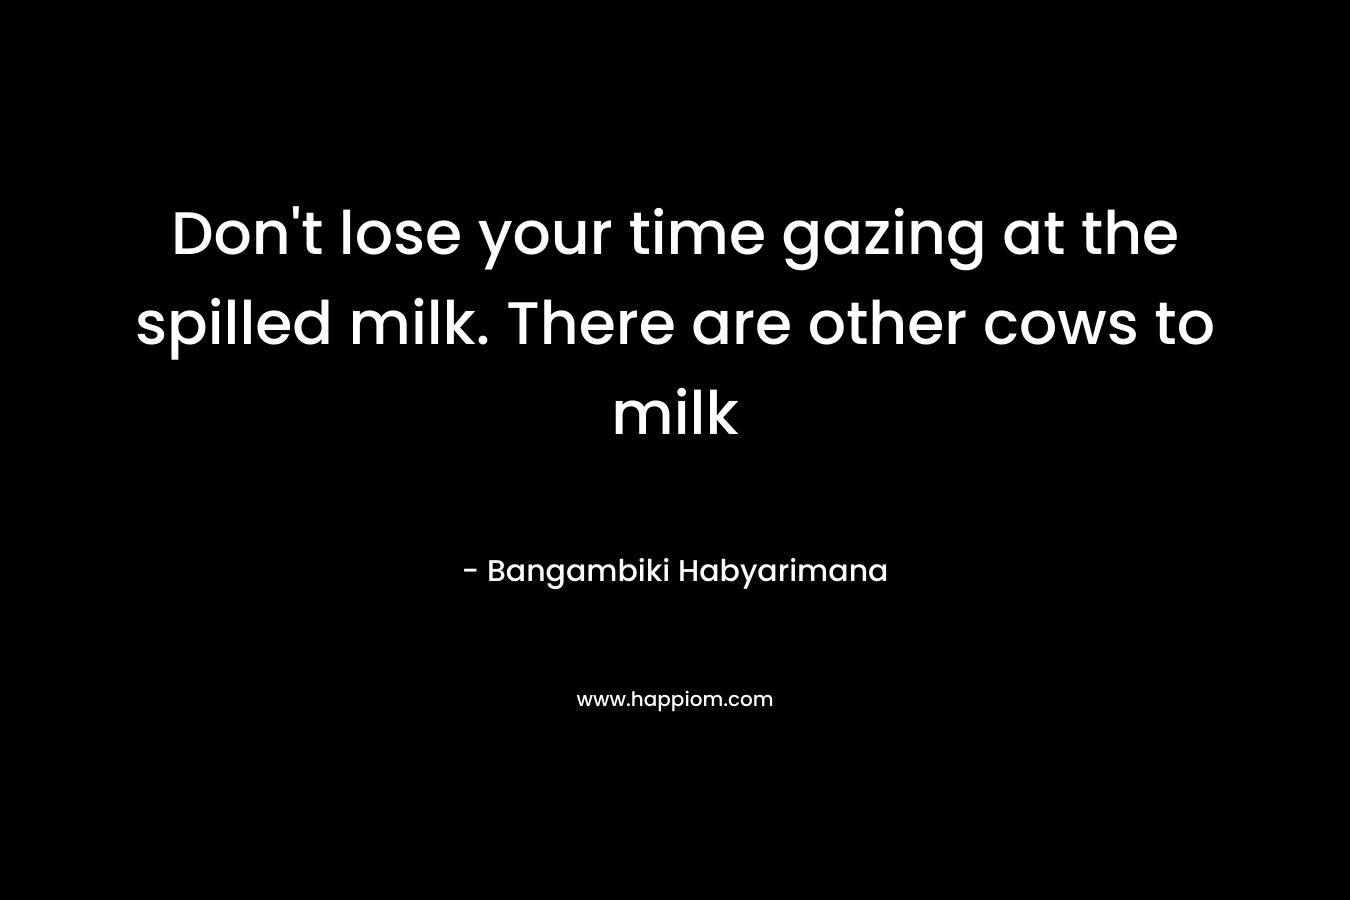 Don't lose your time gazing at the spilled milk. There are other cows to milk